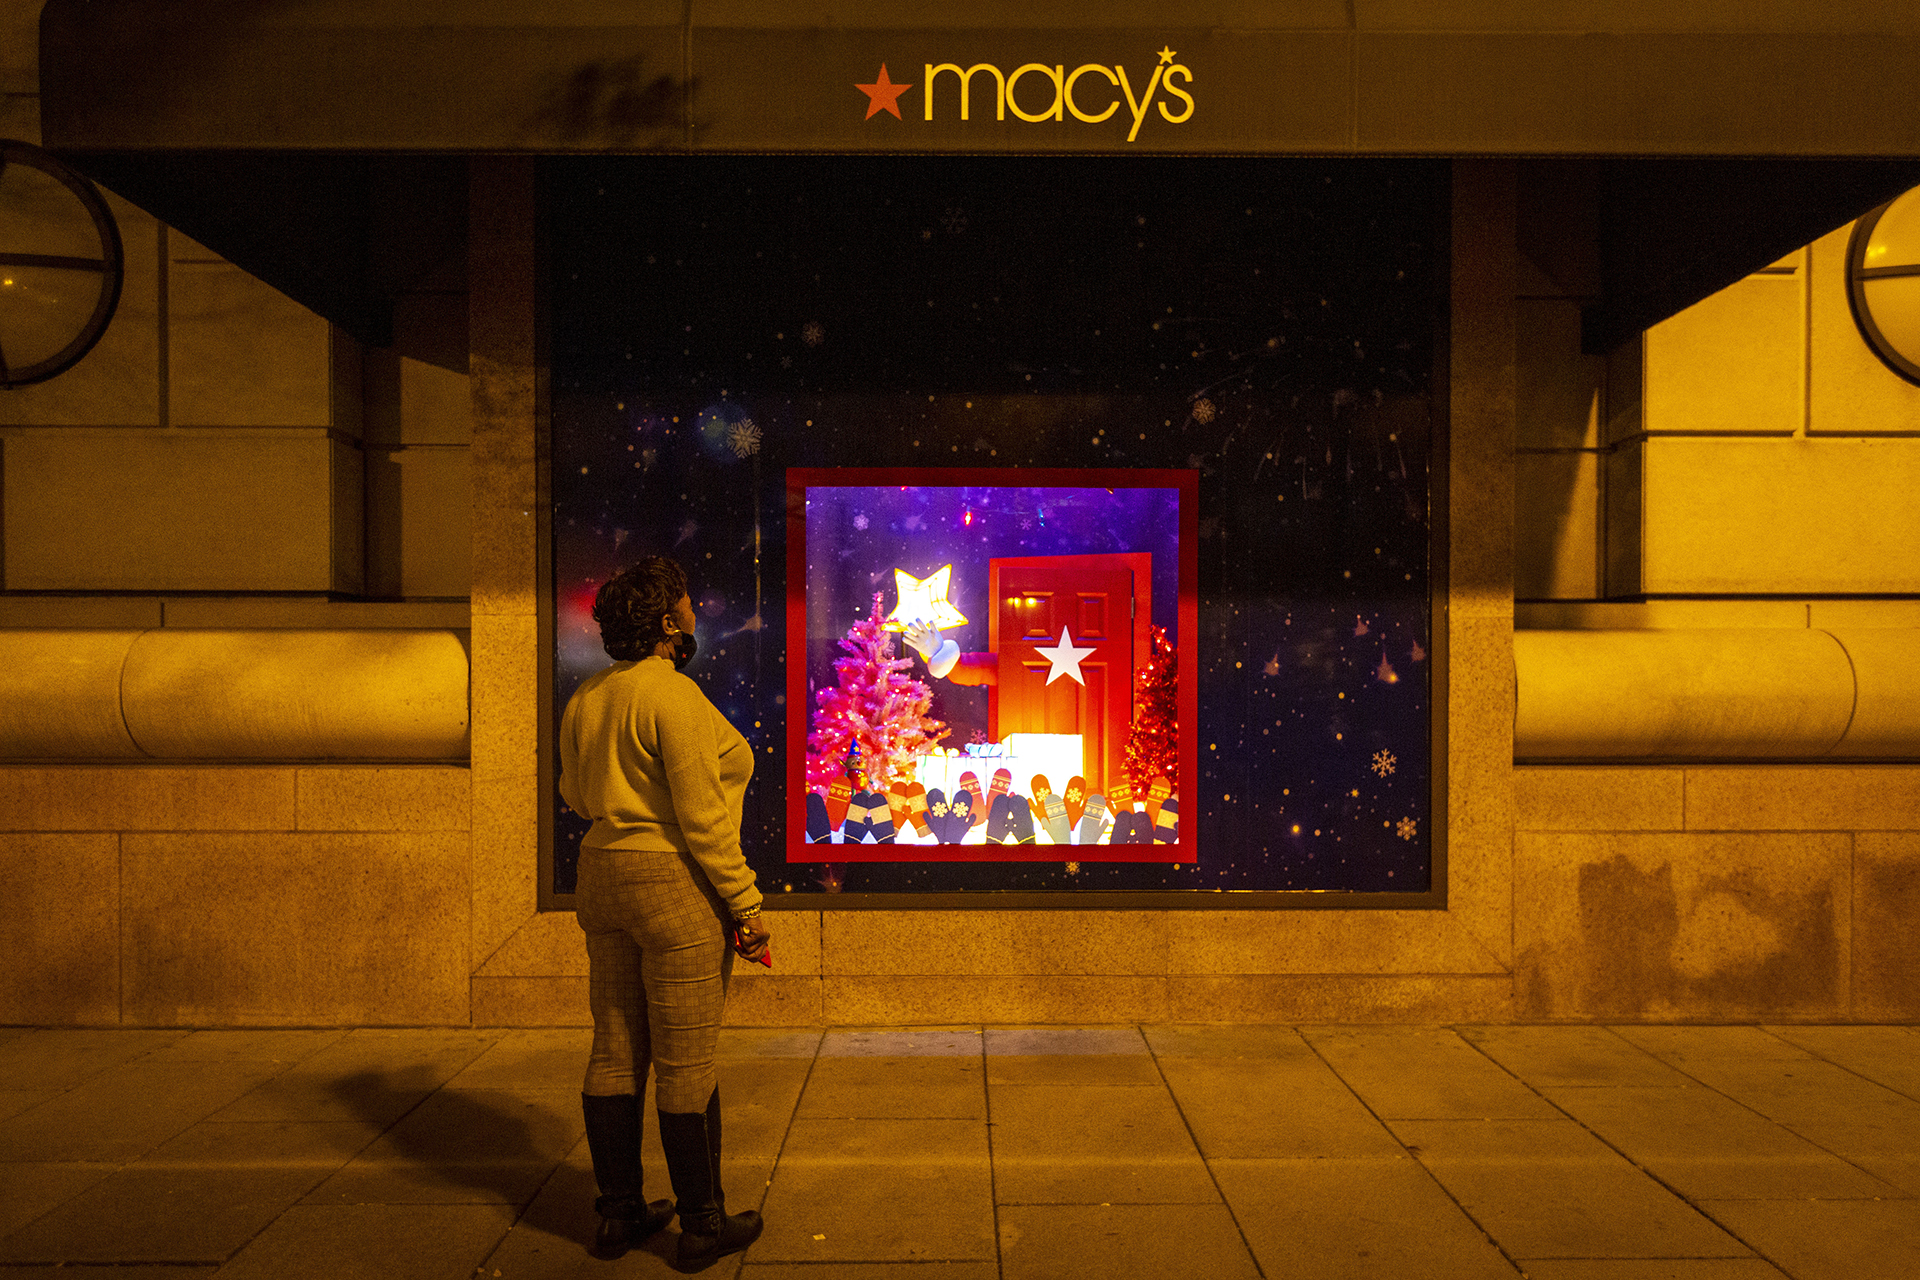 The COMPLETE Guide to Macy's Santaland in NYC (2022)